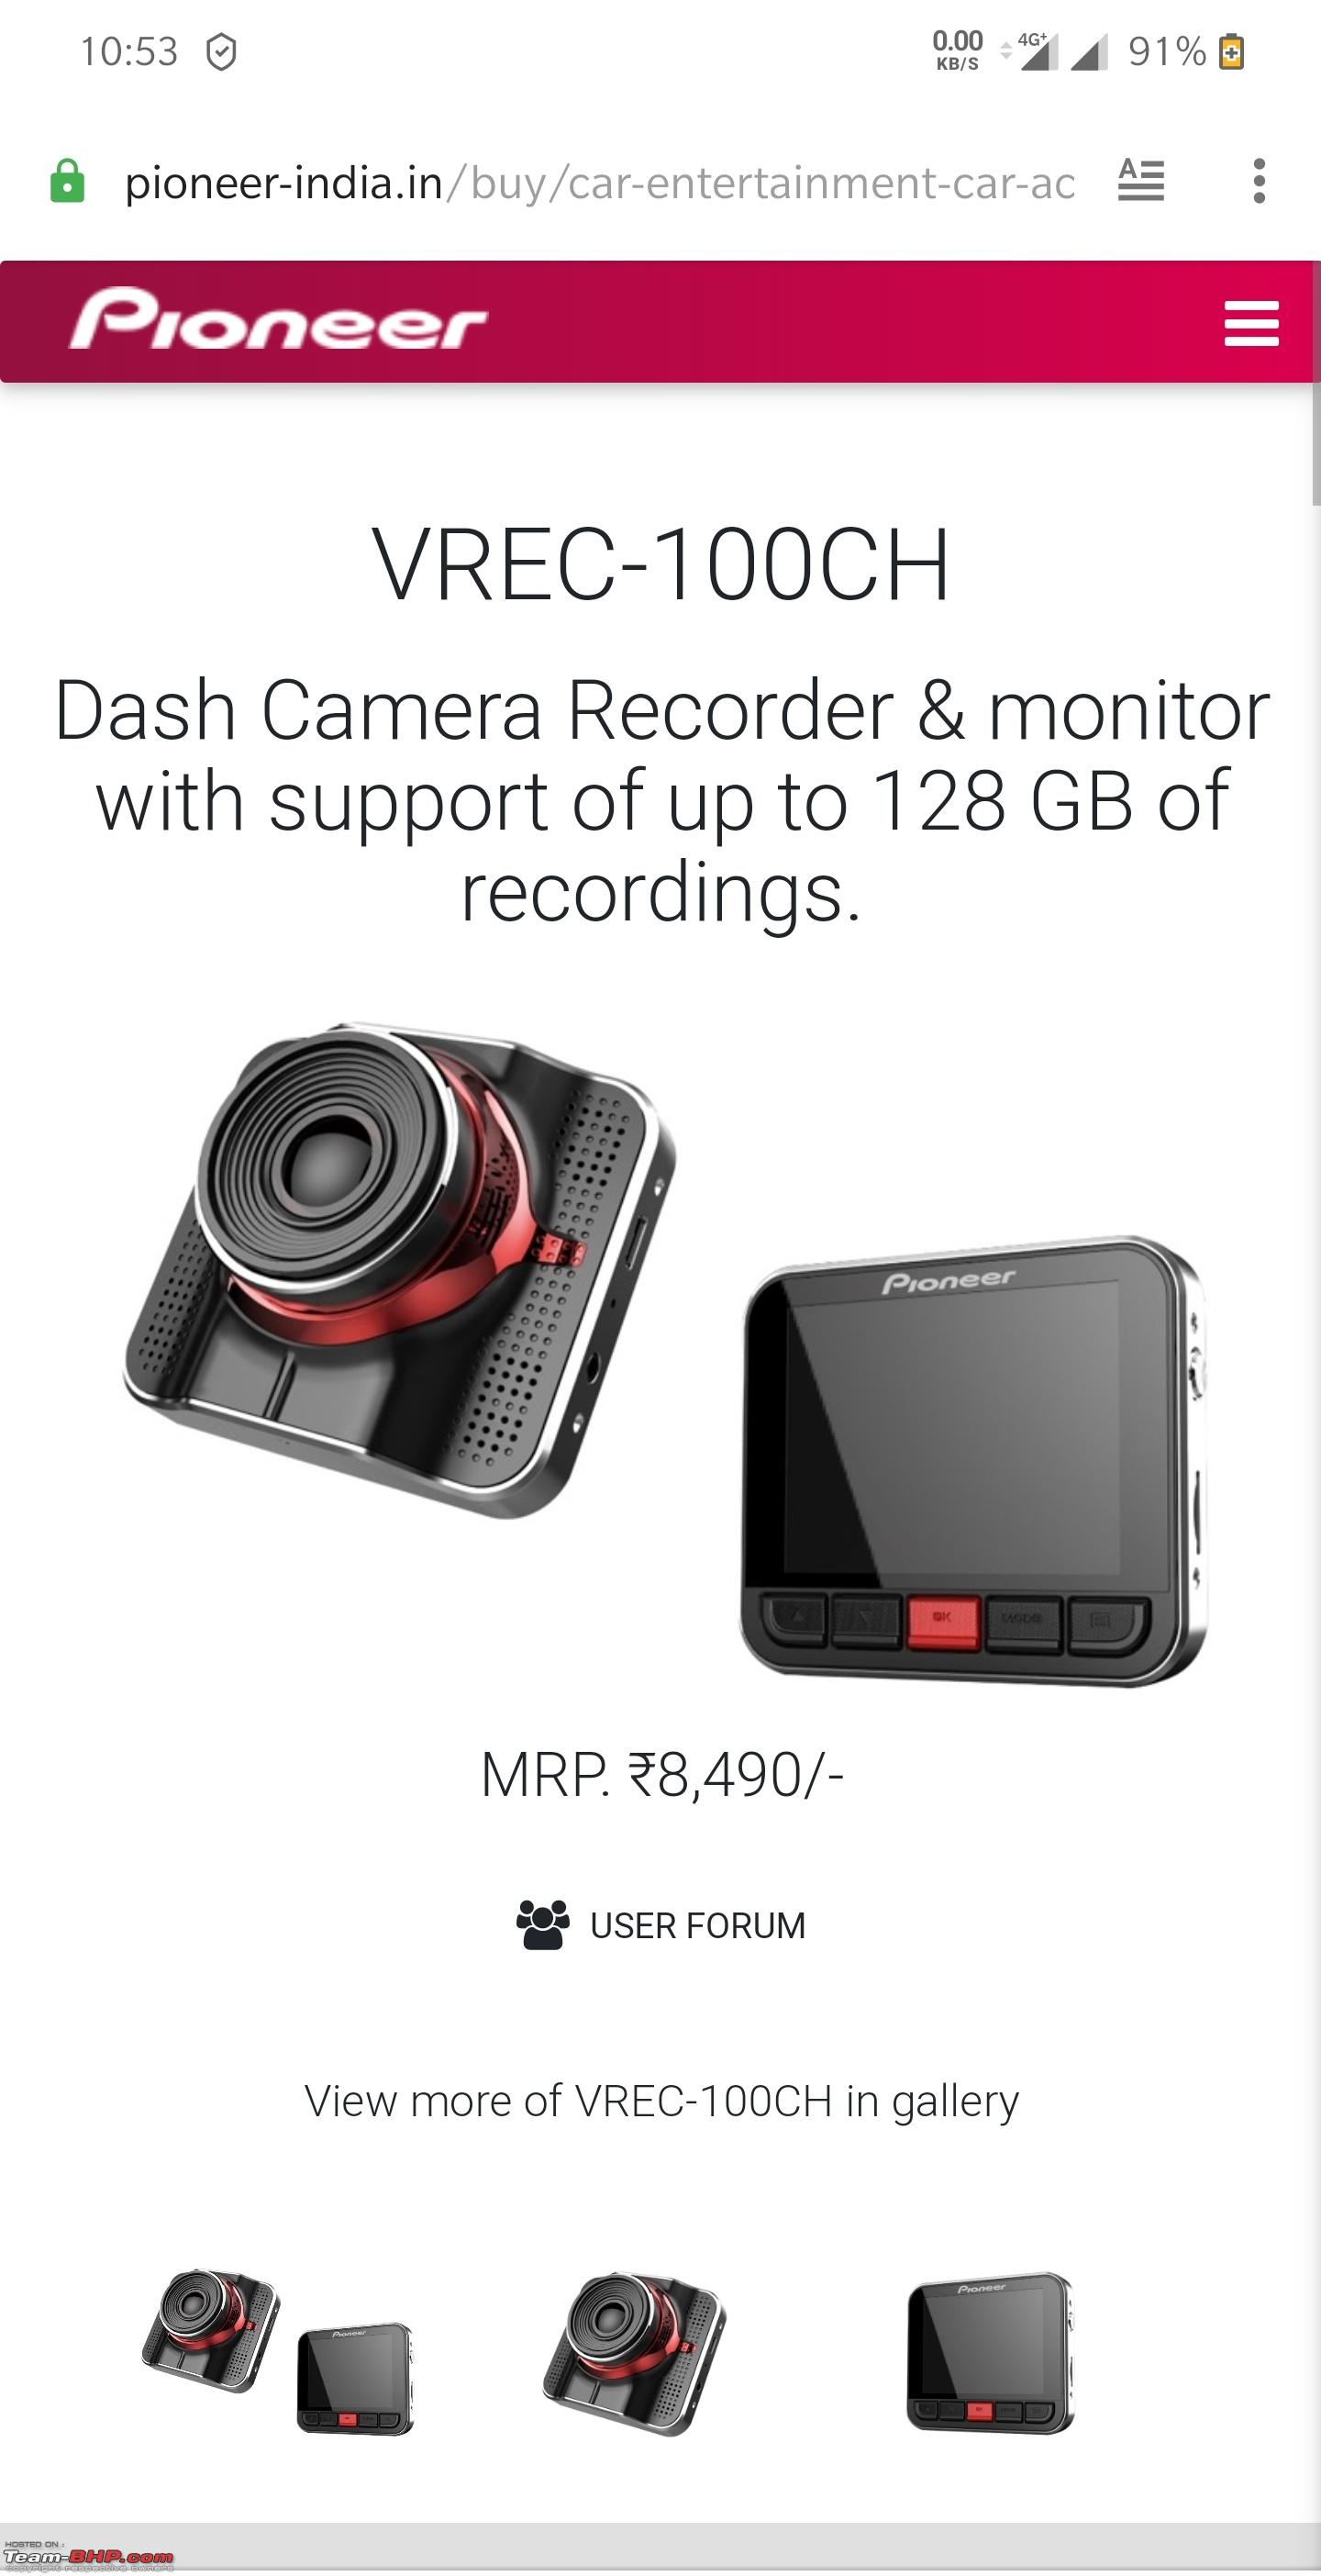 Pioneer India - VREC-100CH  Dash Camera Recorder & monitor with support of  up to 128 GB of recordings.